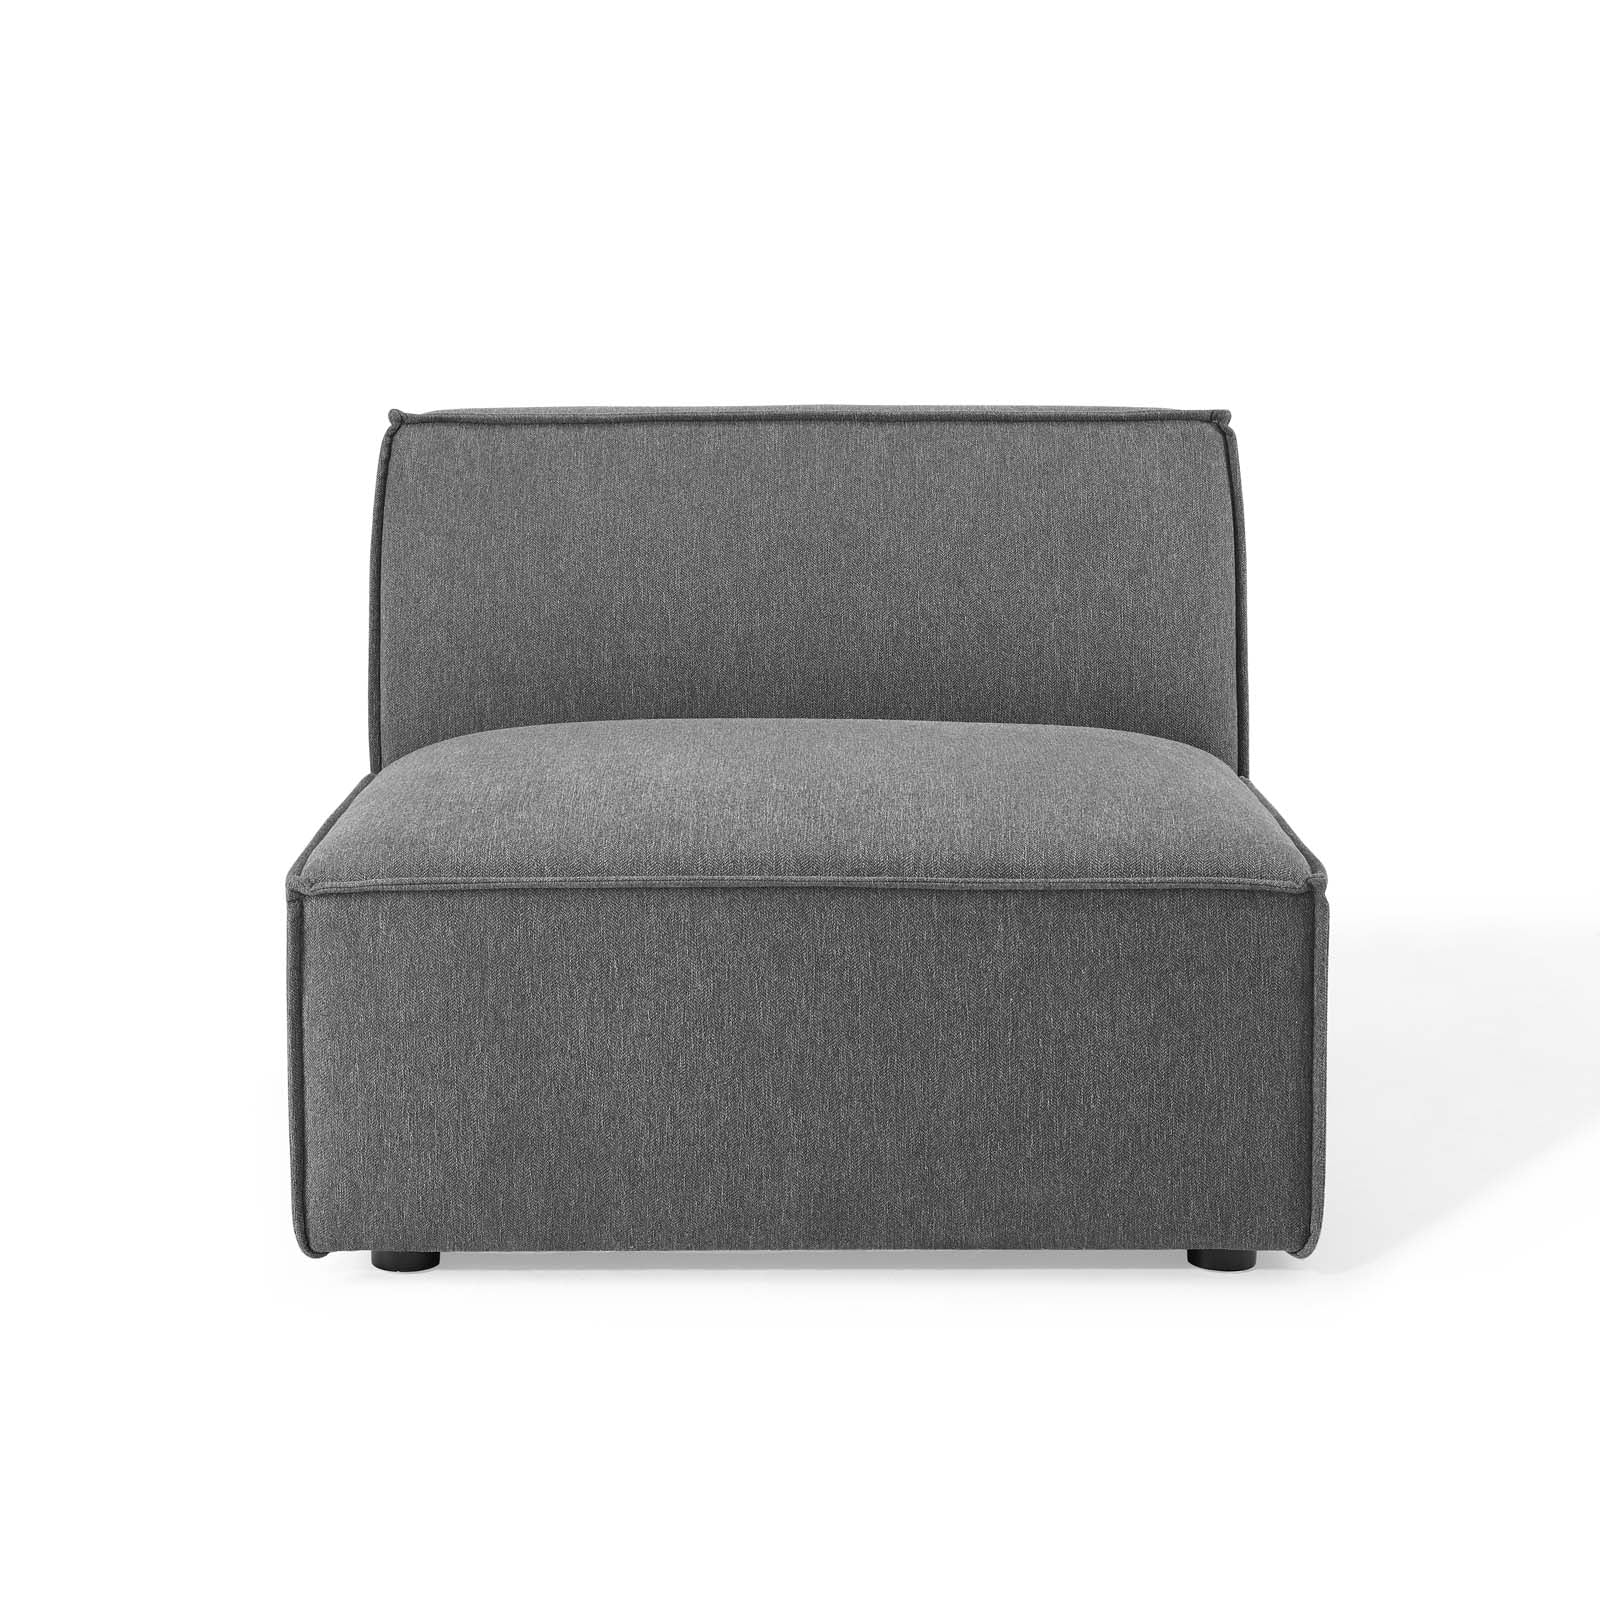 Restore Sectional Sofa Armless Chair - East Shore Modern Home Furnishings